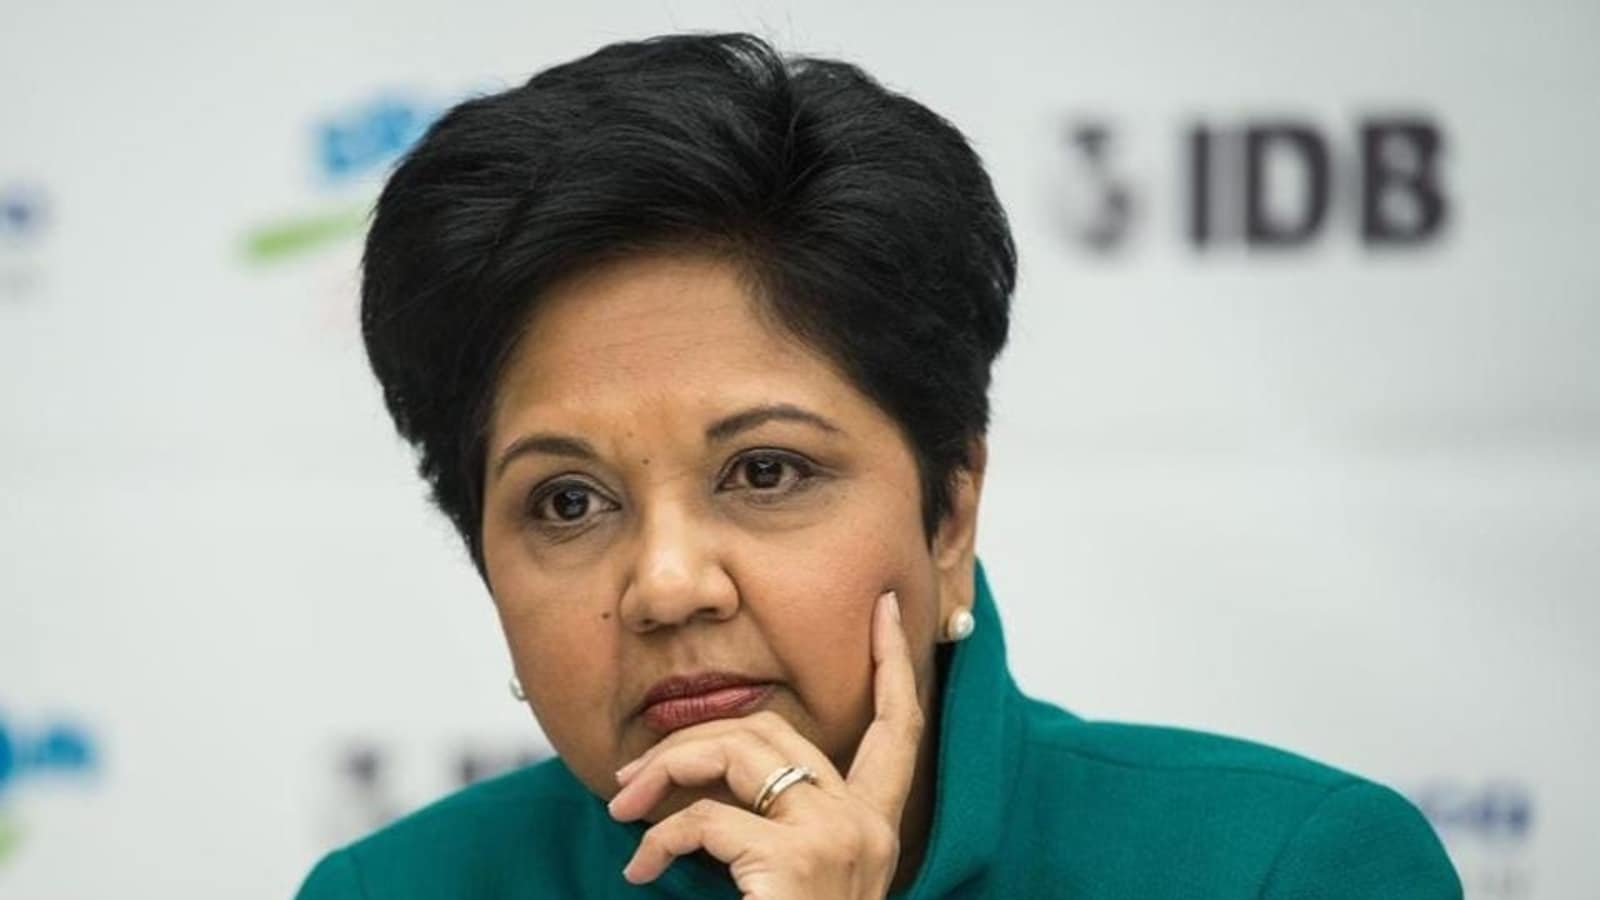 ‘The game kept me at the edge of my chair’: Ex-PepsiCo CEO Indra Nooyi on India's win in T20 World Cup